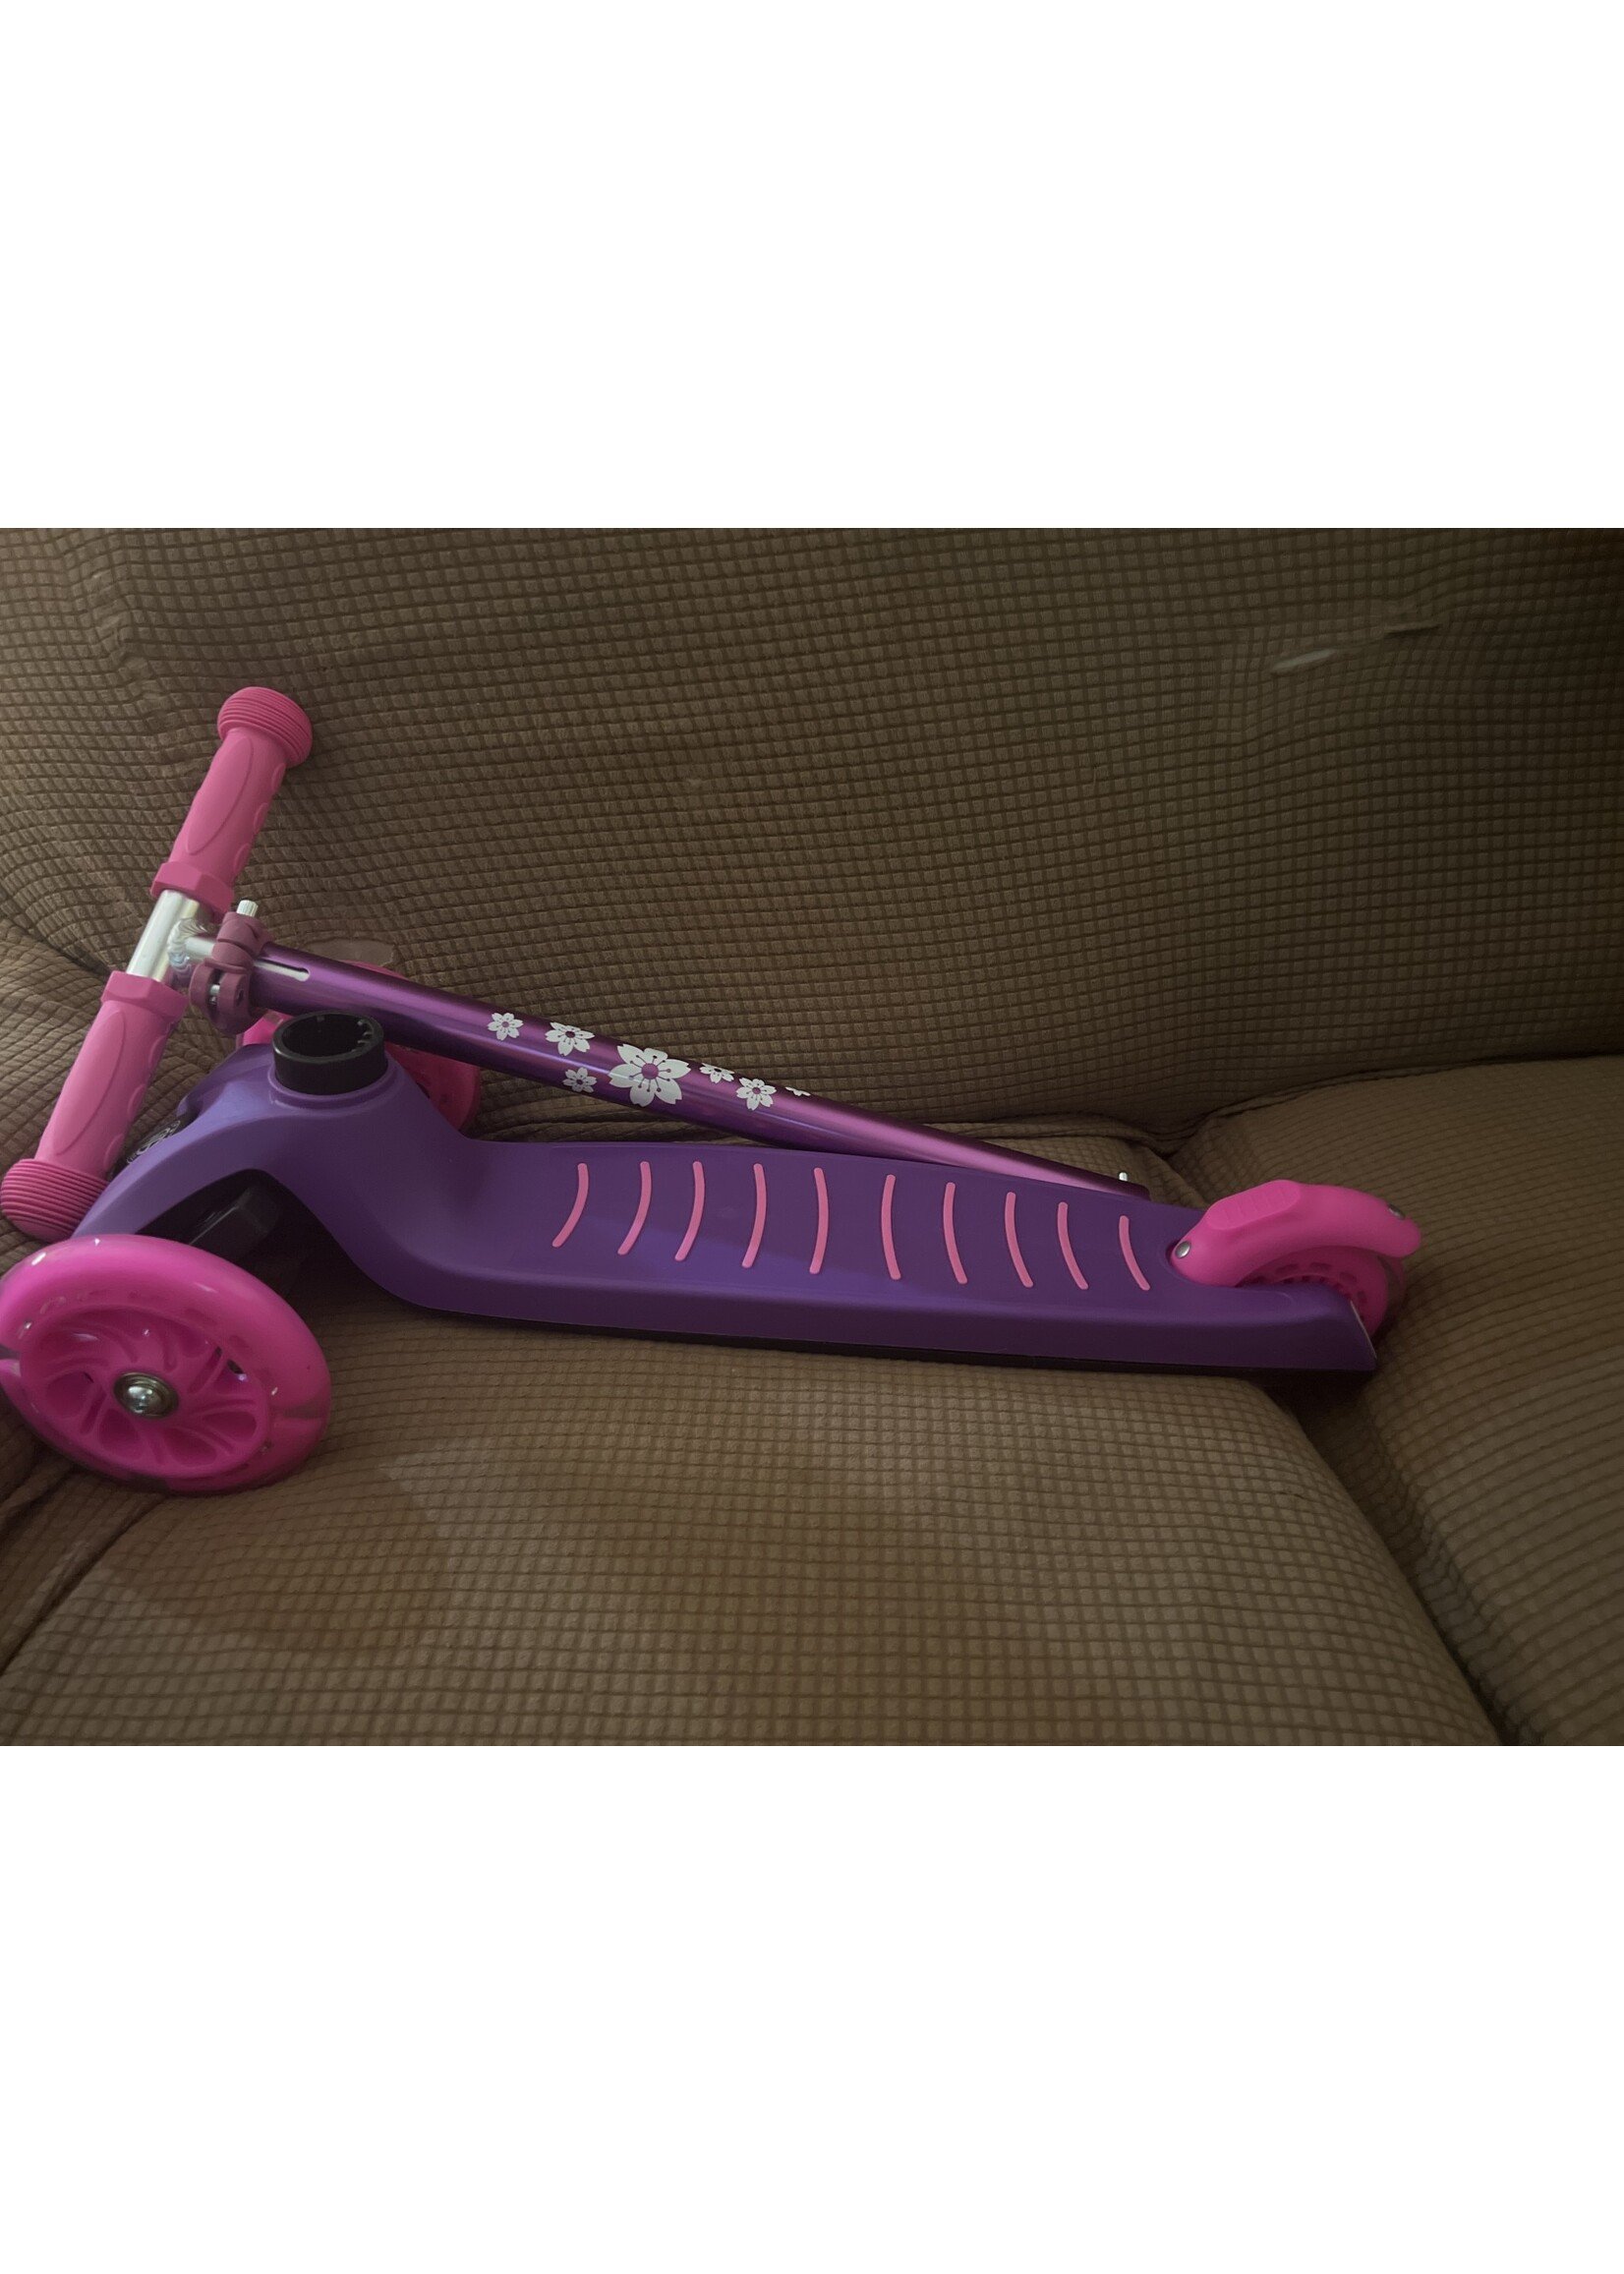 Weehee Tri-scooter w/ LED Wheels (max 110 lb) pink adjustable scooter